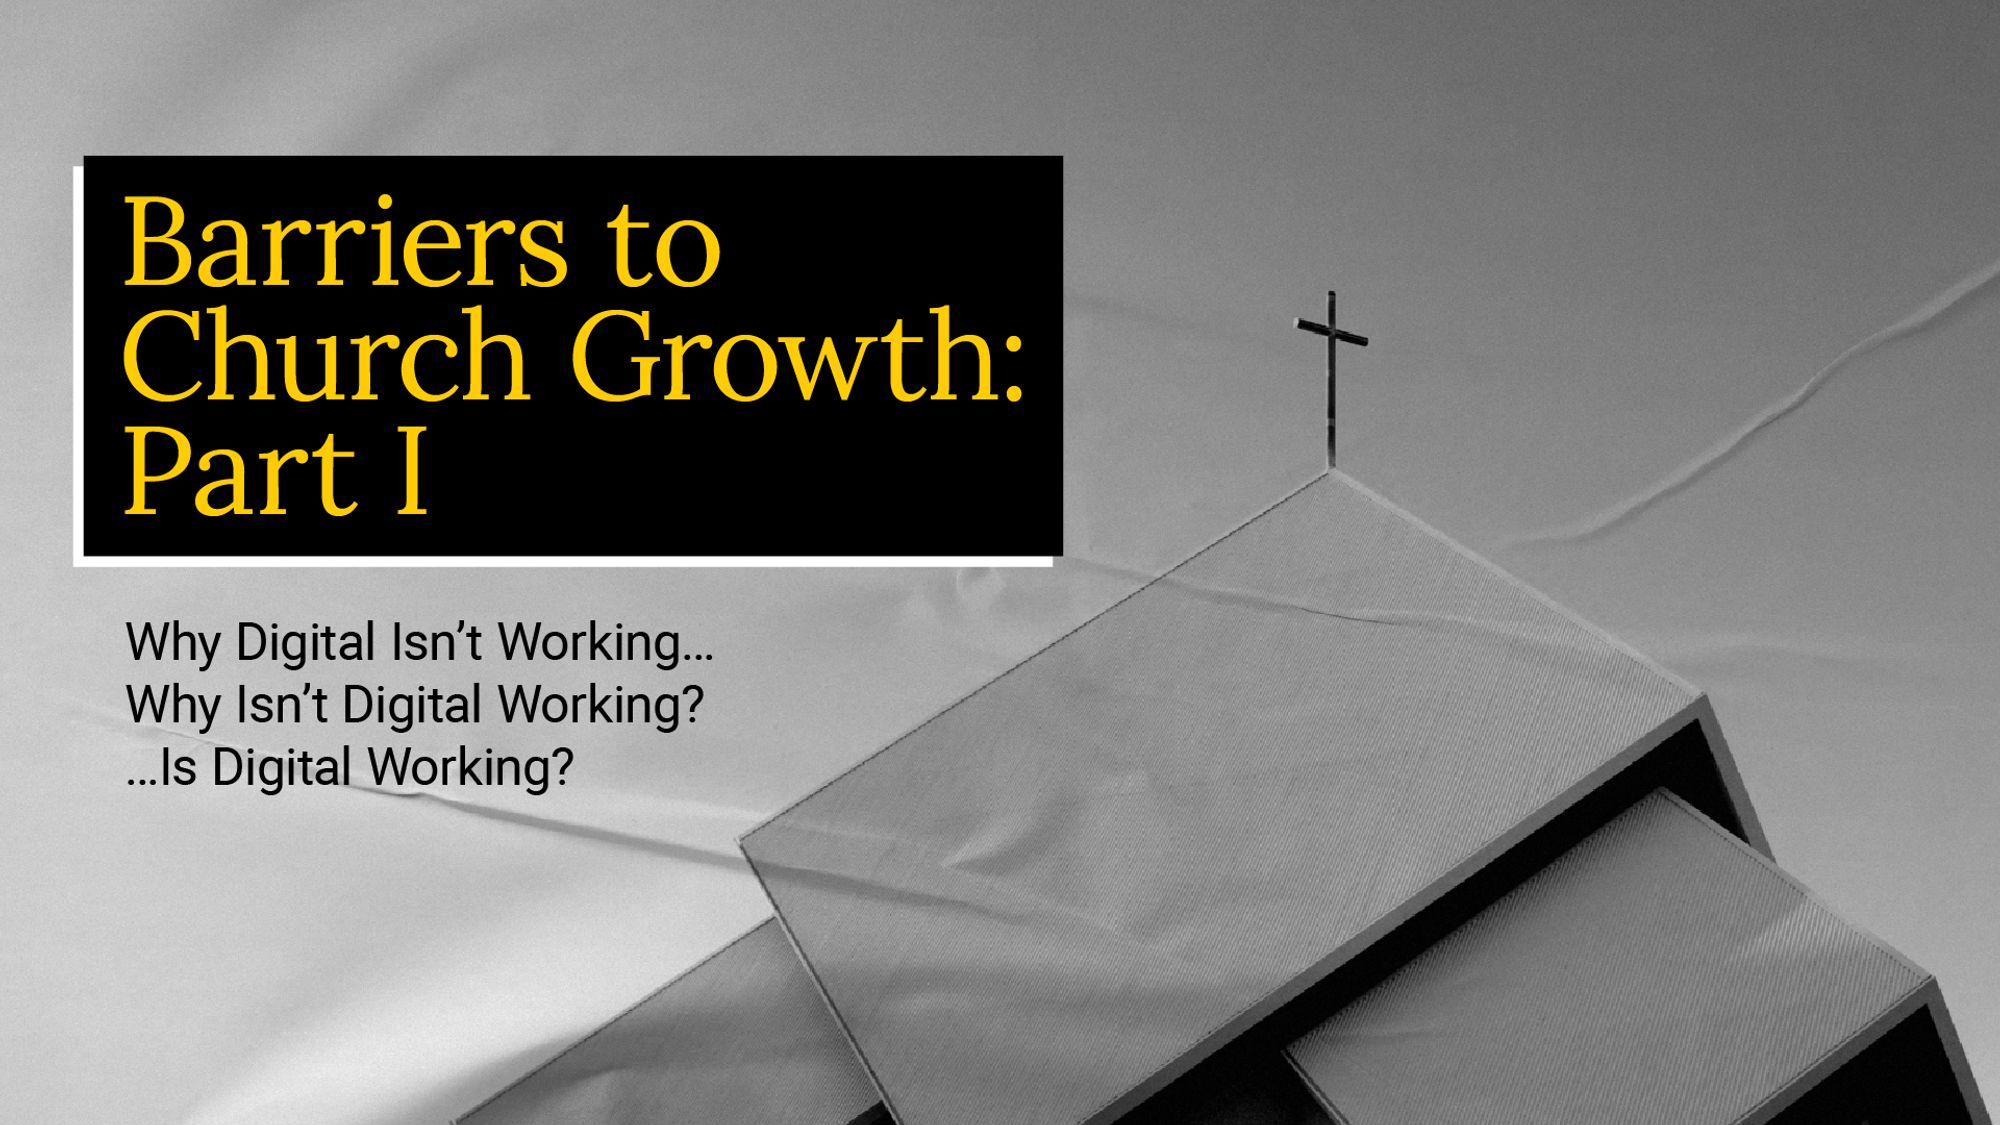 Barriers To Church Growth - Is Digital Working?